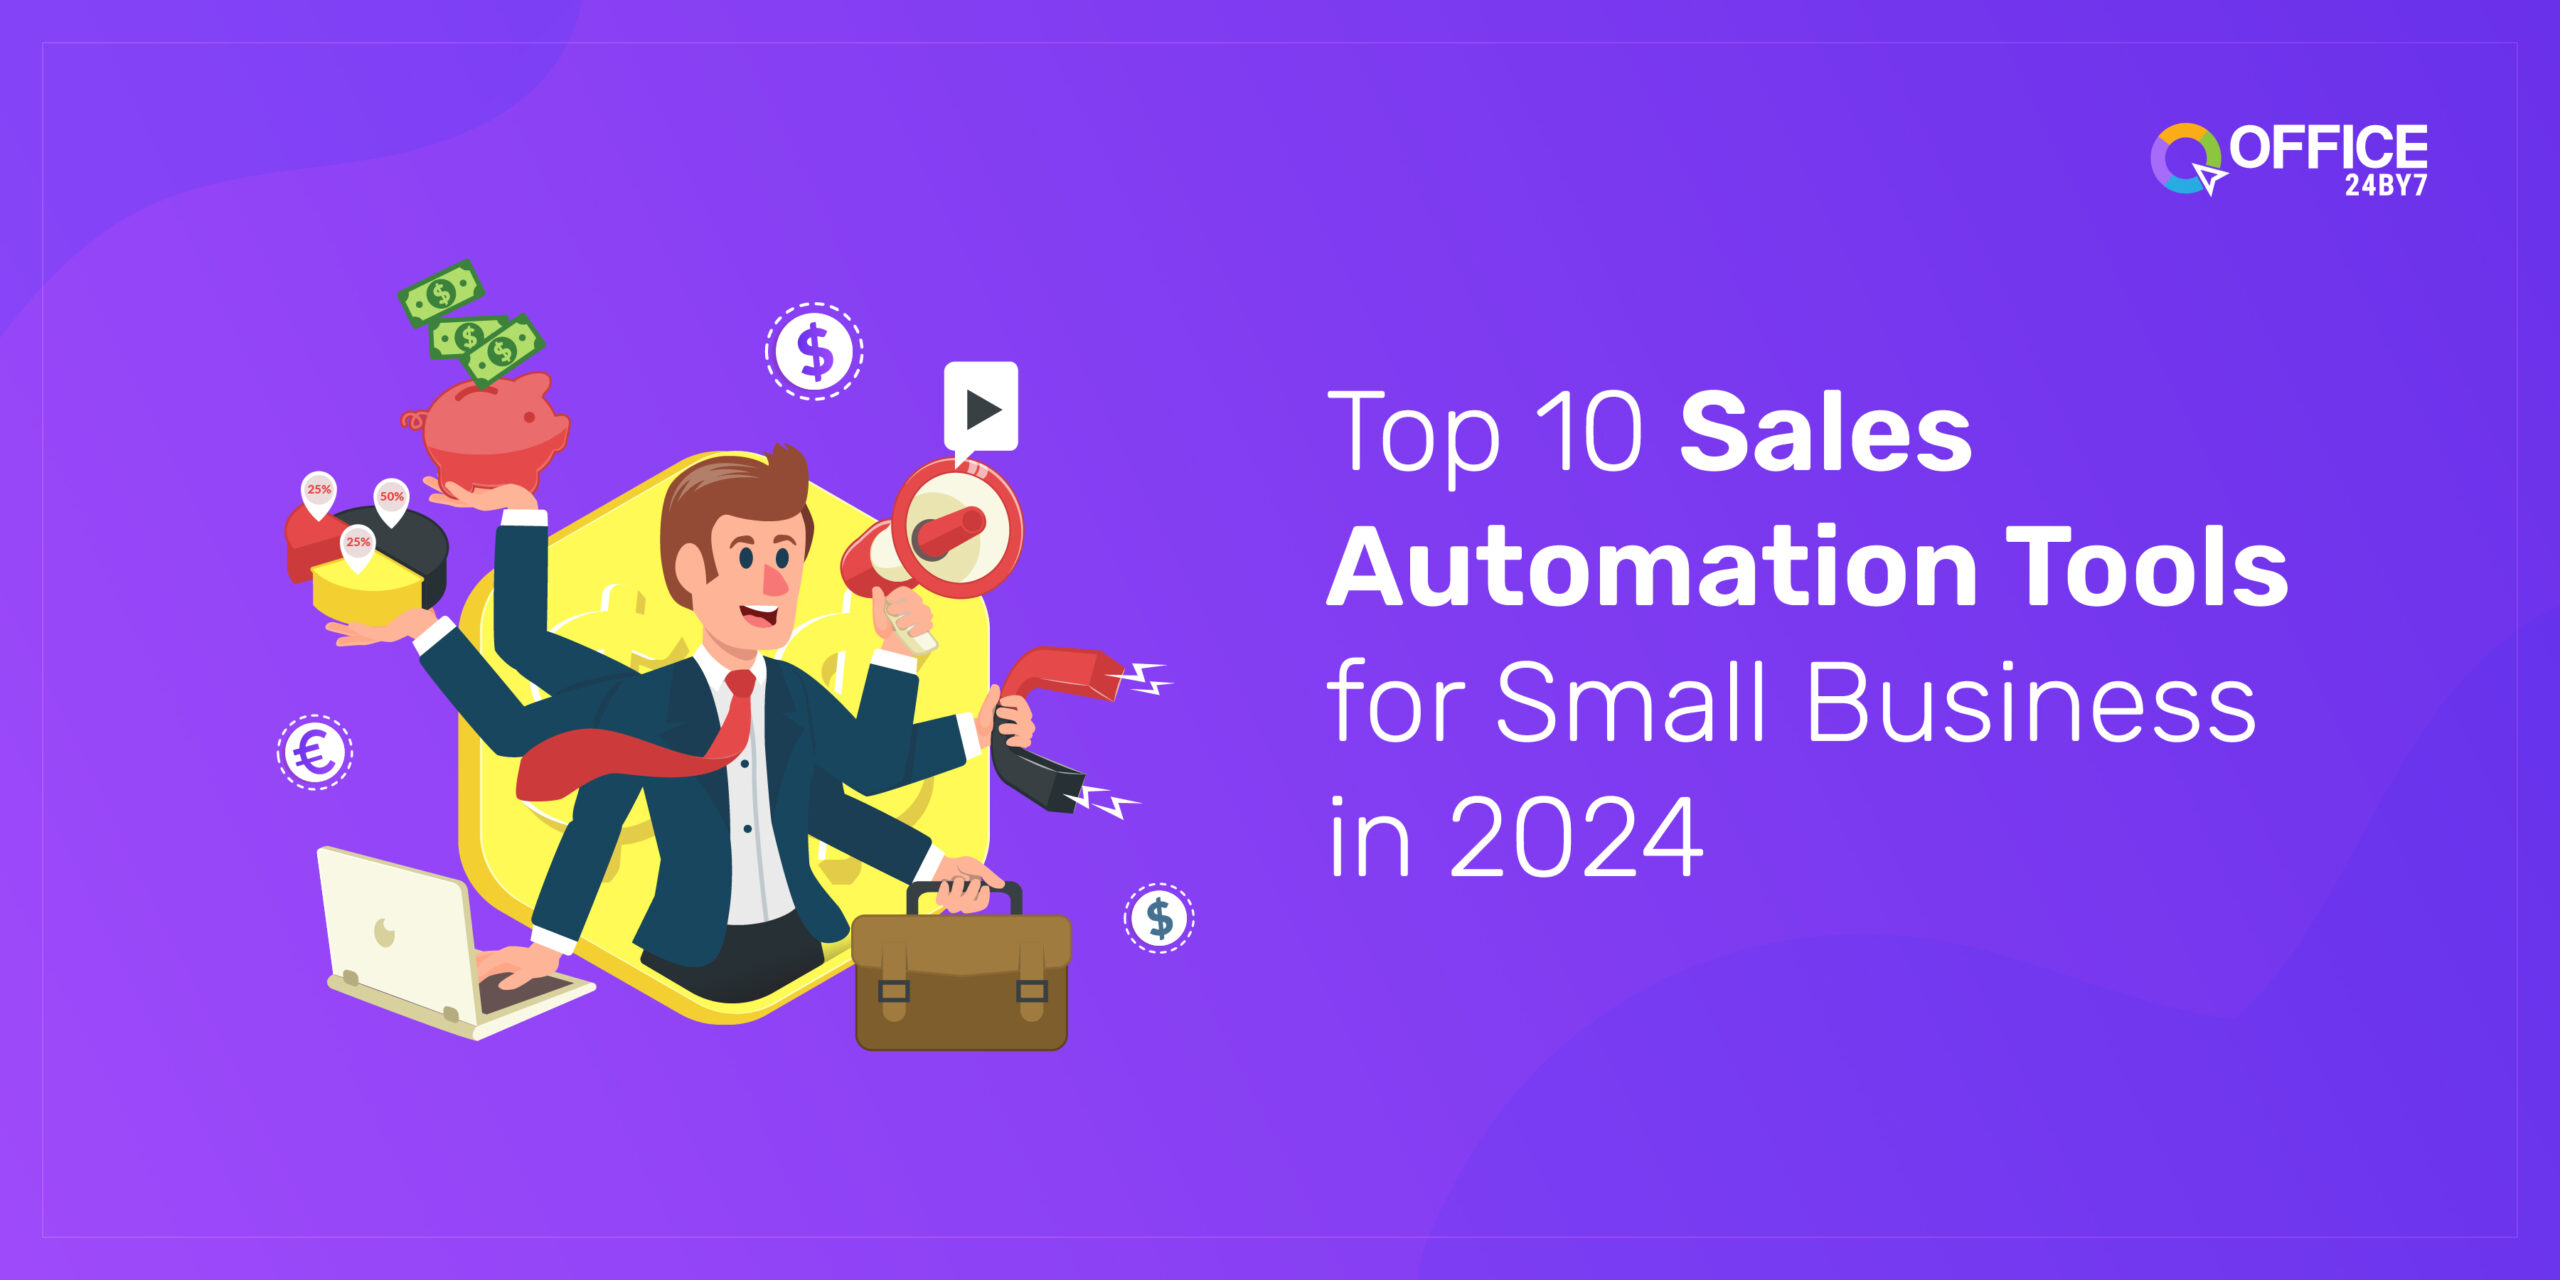 Top 10 sales automation tools for small businesses in 2024 | Office24by7